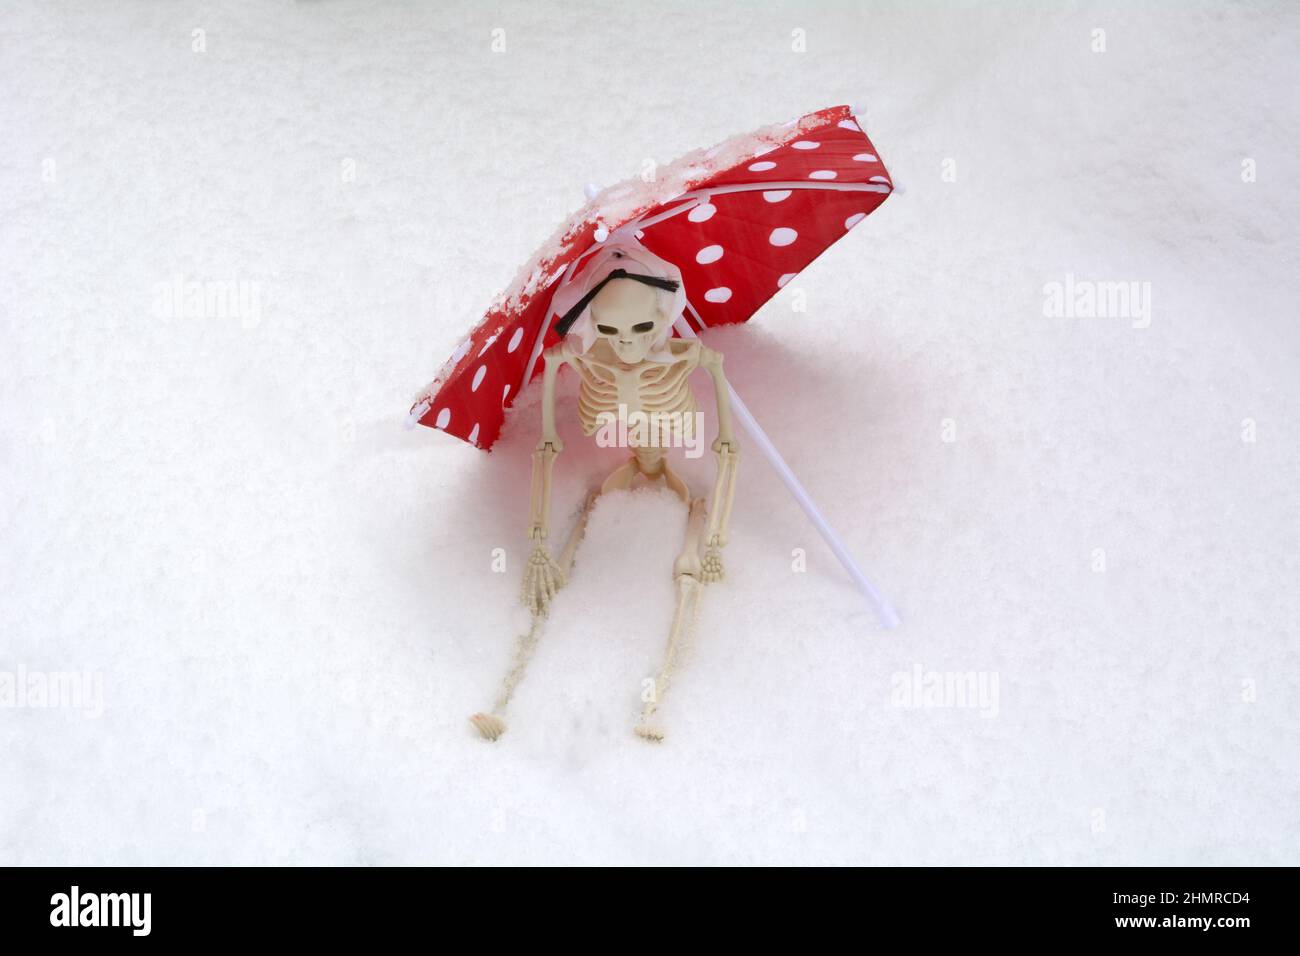 Sitting skeleton shielded by red parasol with white polka dots during snow storm Stock Photo